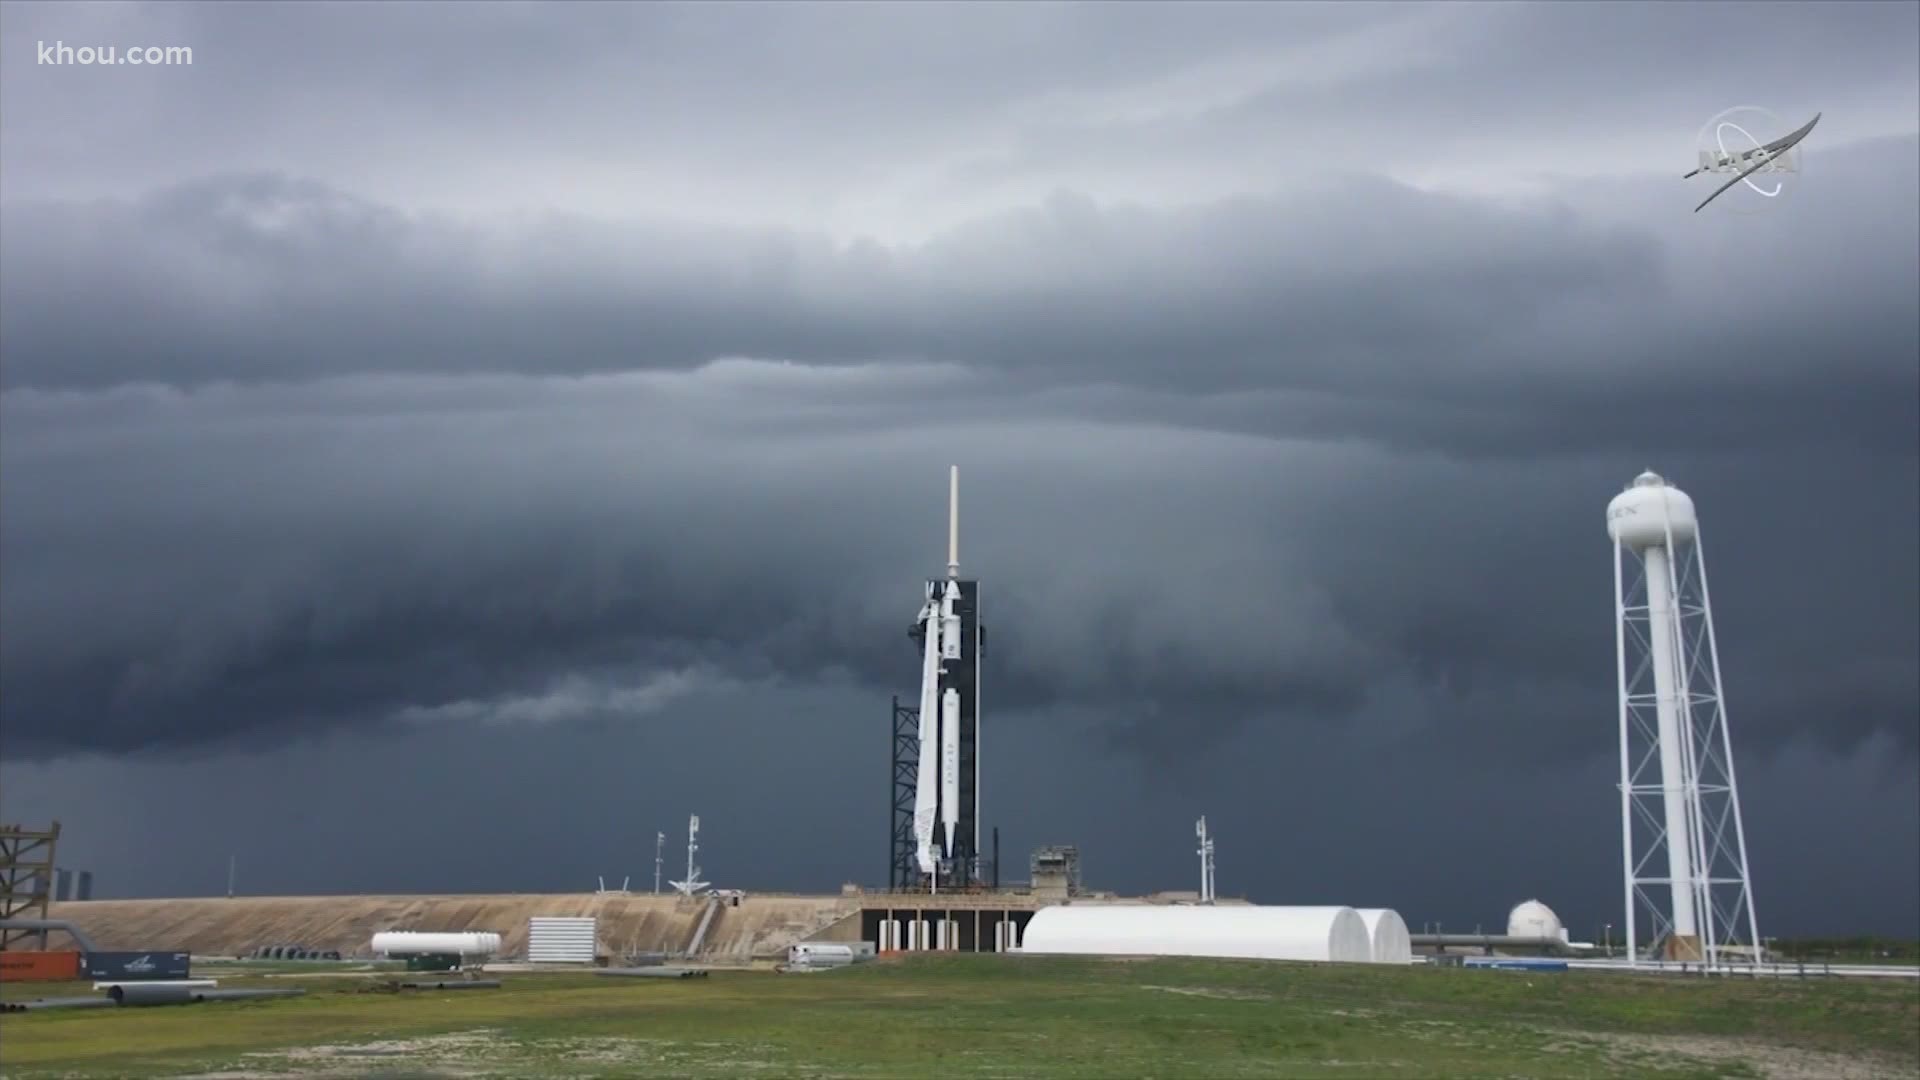 The launch has been postponed until Saturday at 2:33 p.m. CST.